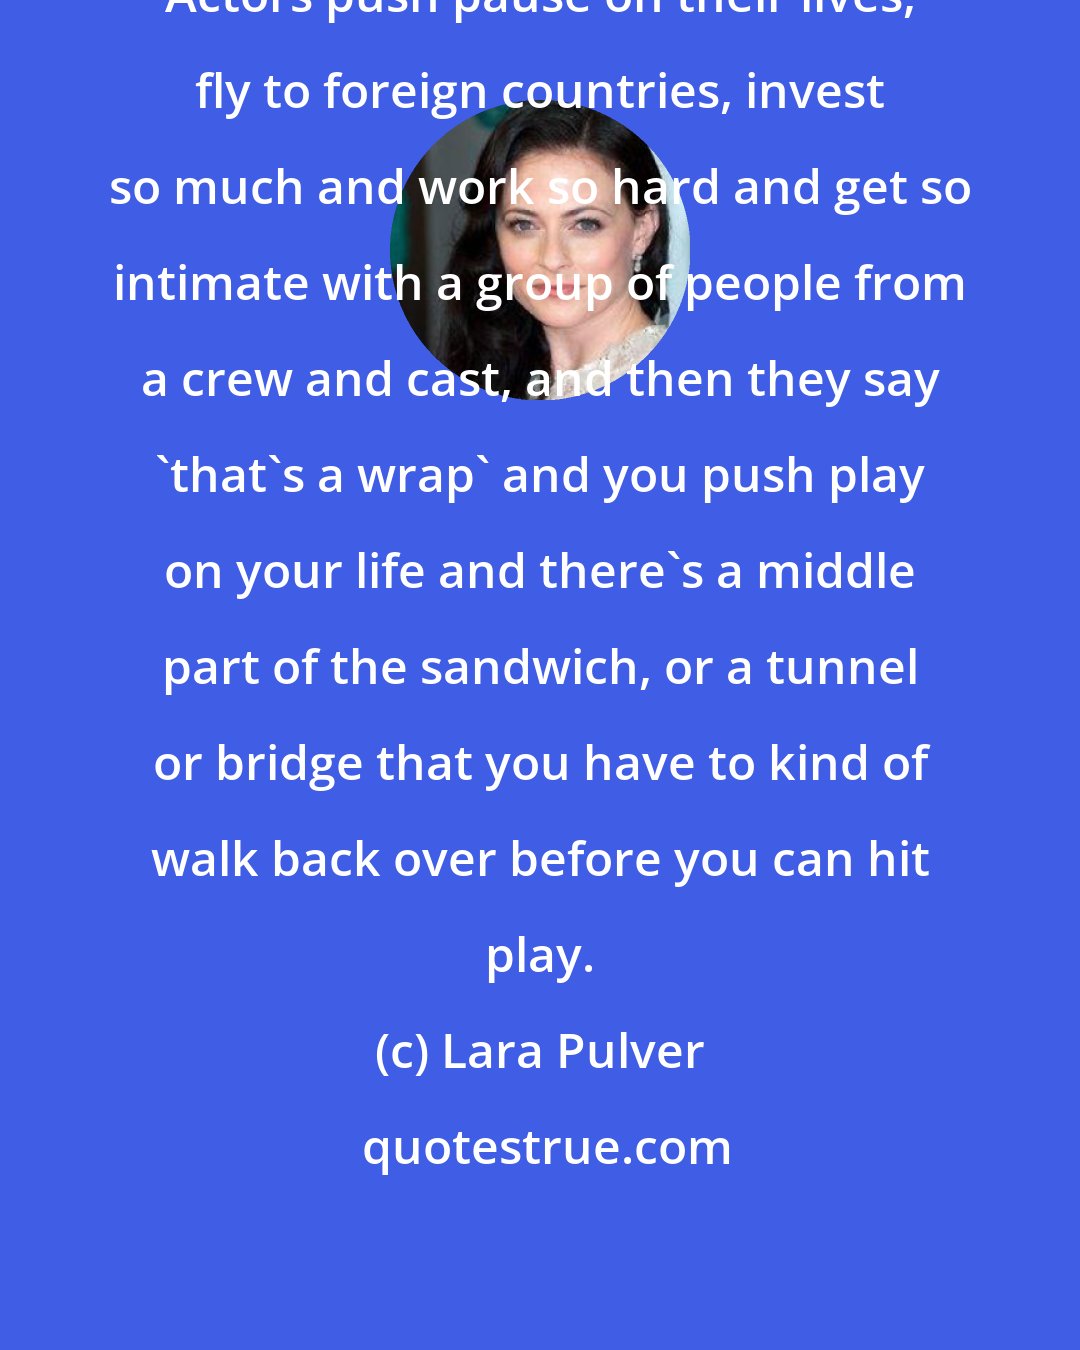 Lara Pulver: Actors push pause on their lives, fly to foreign countries, invest so much and work so hard and get so intimate with a group of people from a crew and cast, and then they say 'that's a wrap' and you push play on your life and there's a middle part of the sandwich, or a tunnel or bridge that you have to kind of walk back over before you can hit play.